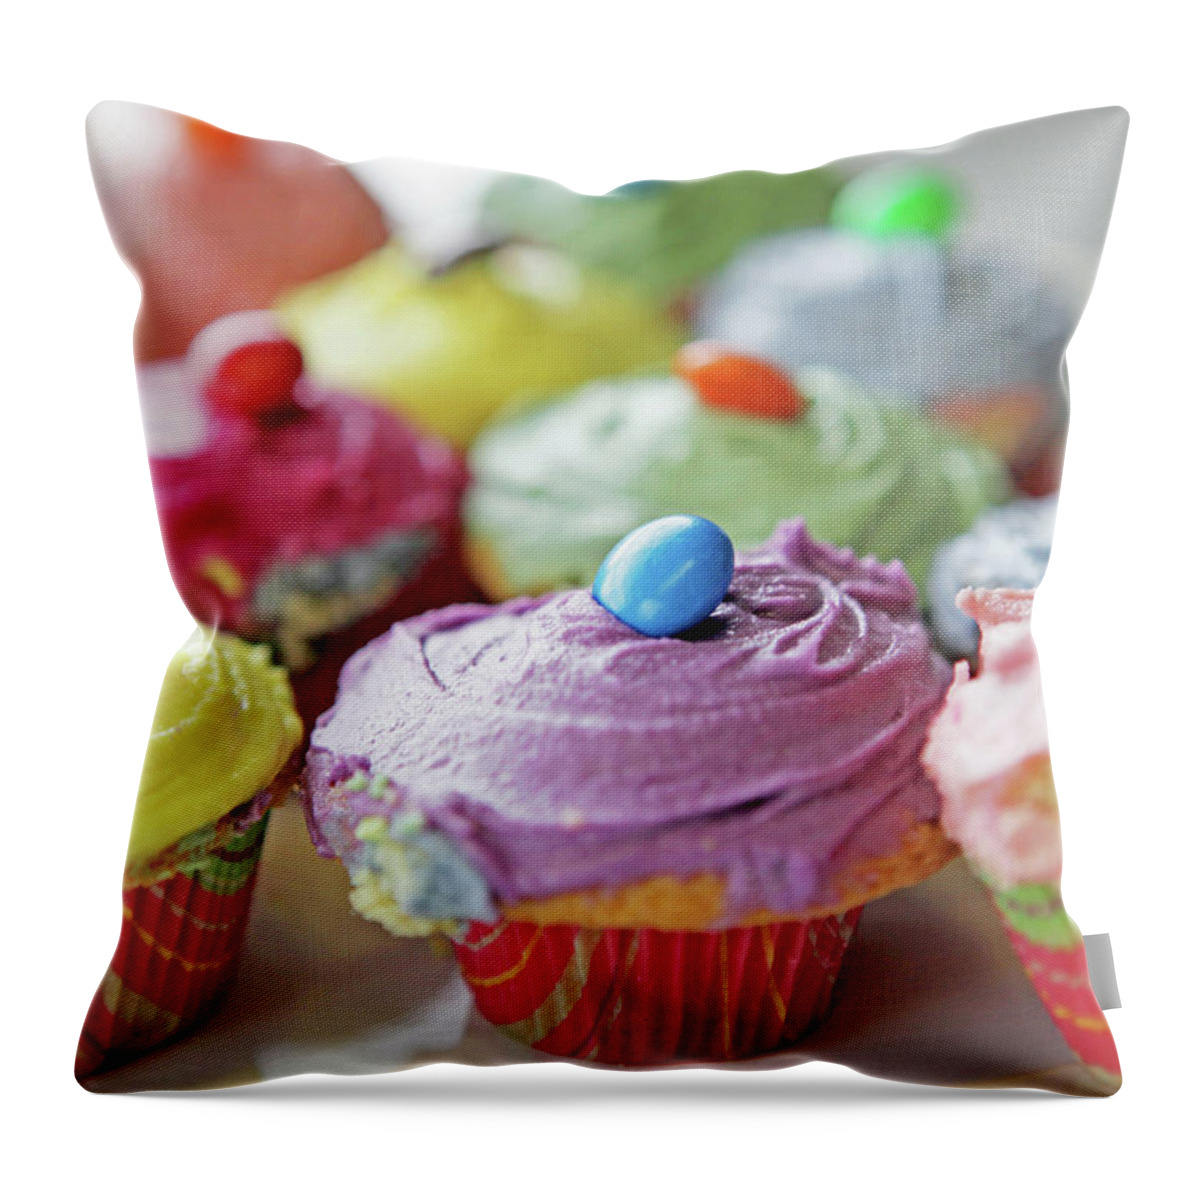 Unhealthy Eating Throw Pillow featuring the photograph Homemade Cupcakes by Richard Newstead